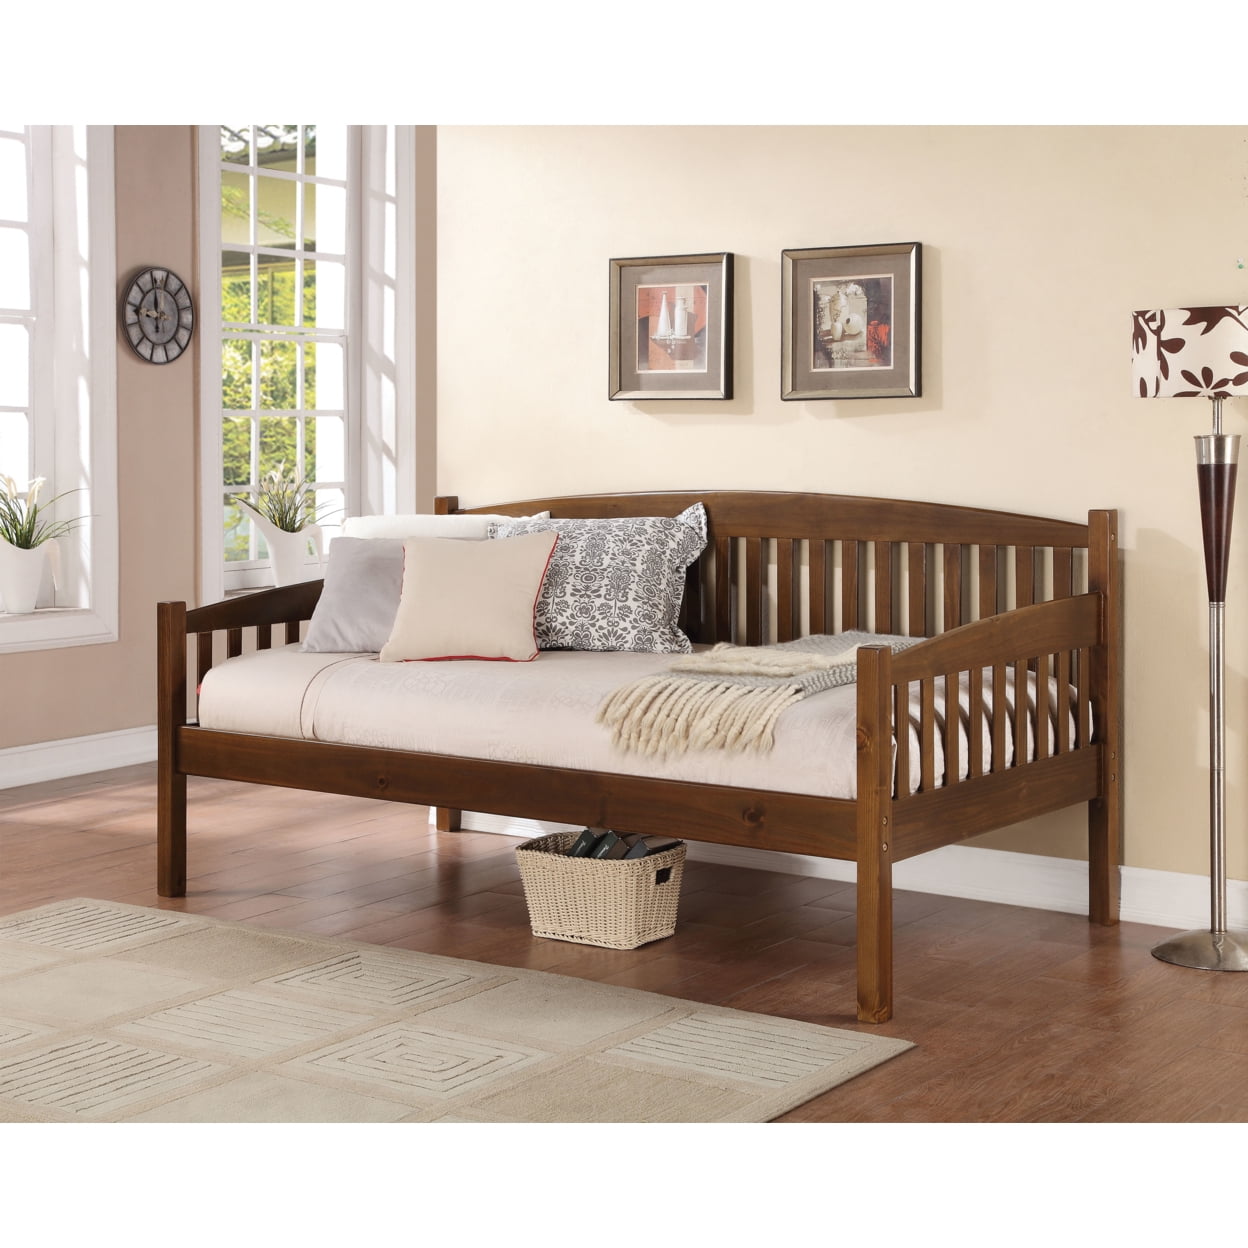 Picture of ACME 39090 2 Piece Caryn Daybed, Antique Oak - 37 x 80 x 42 in.